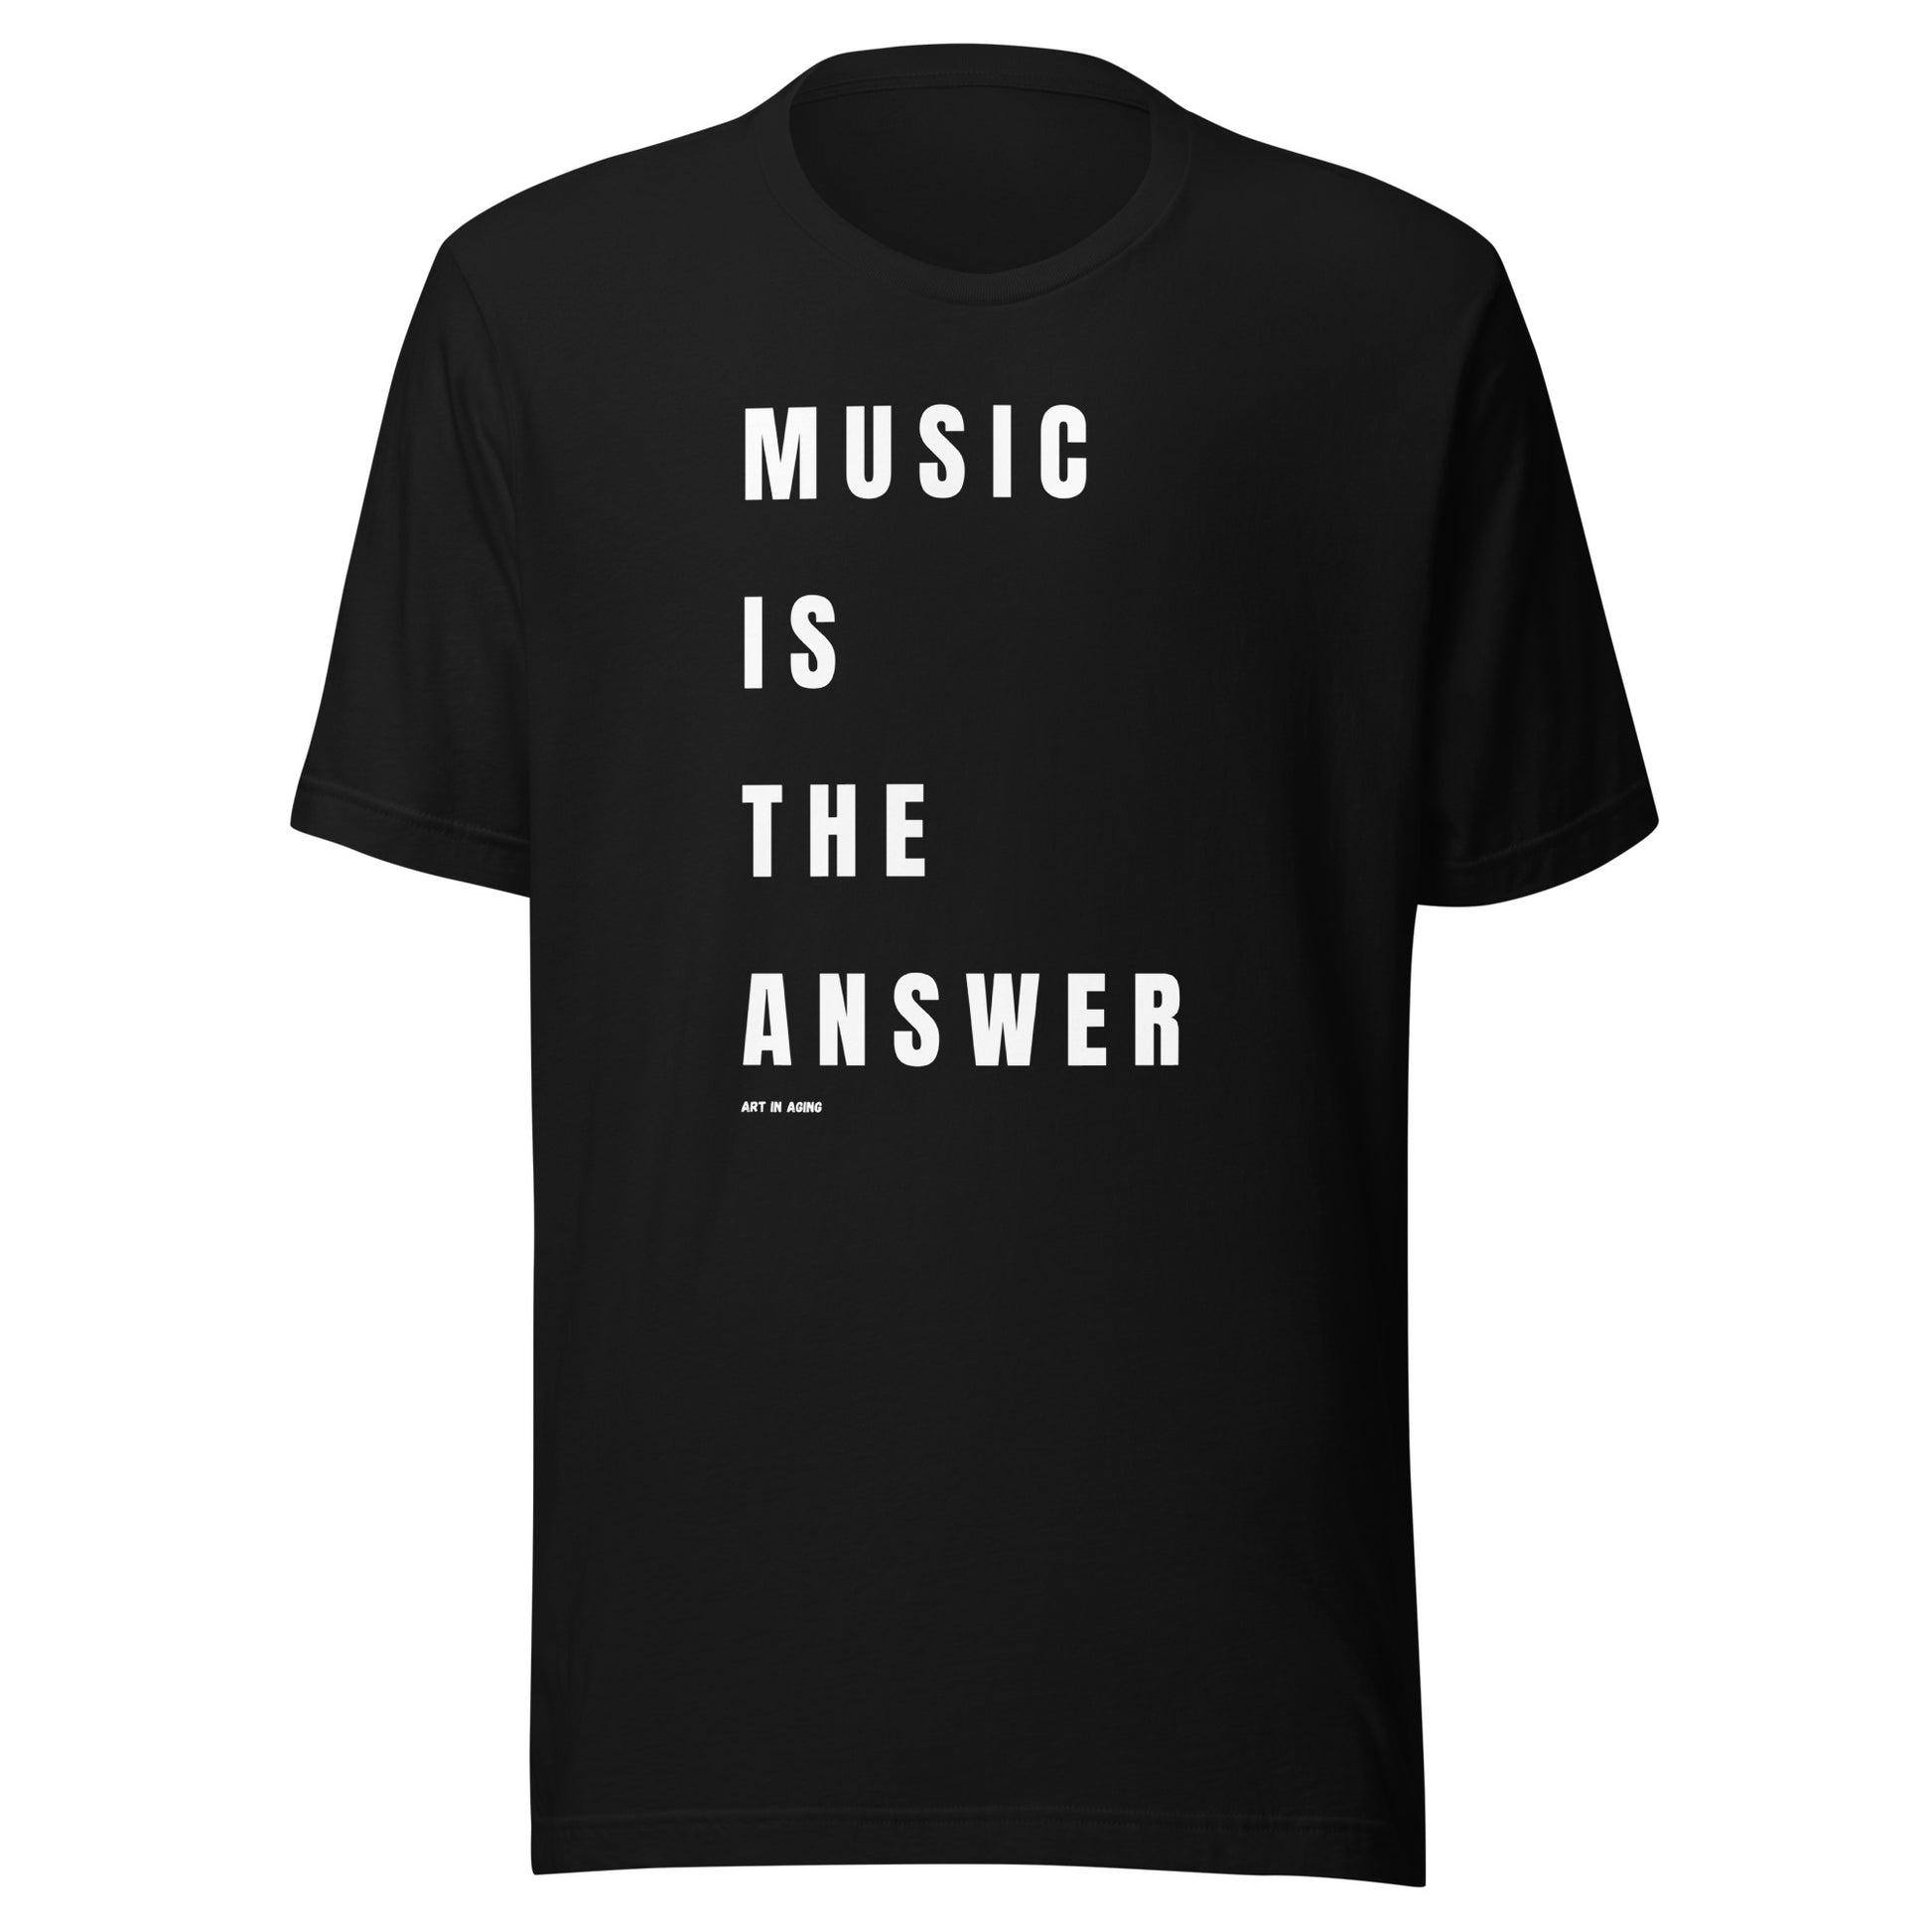 Music is the Answer T-Shirt | Art in Aging